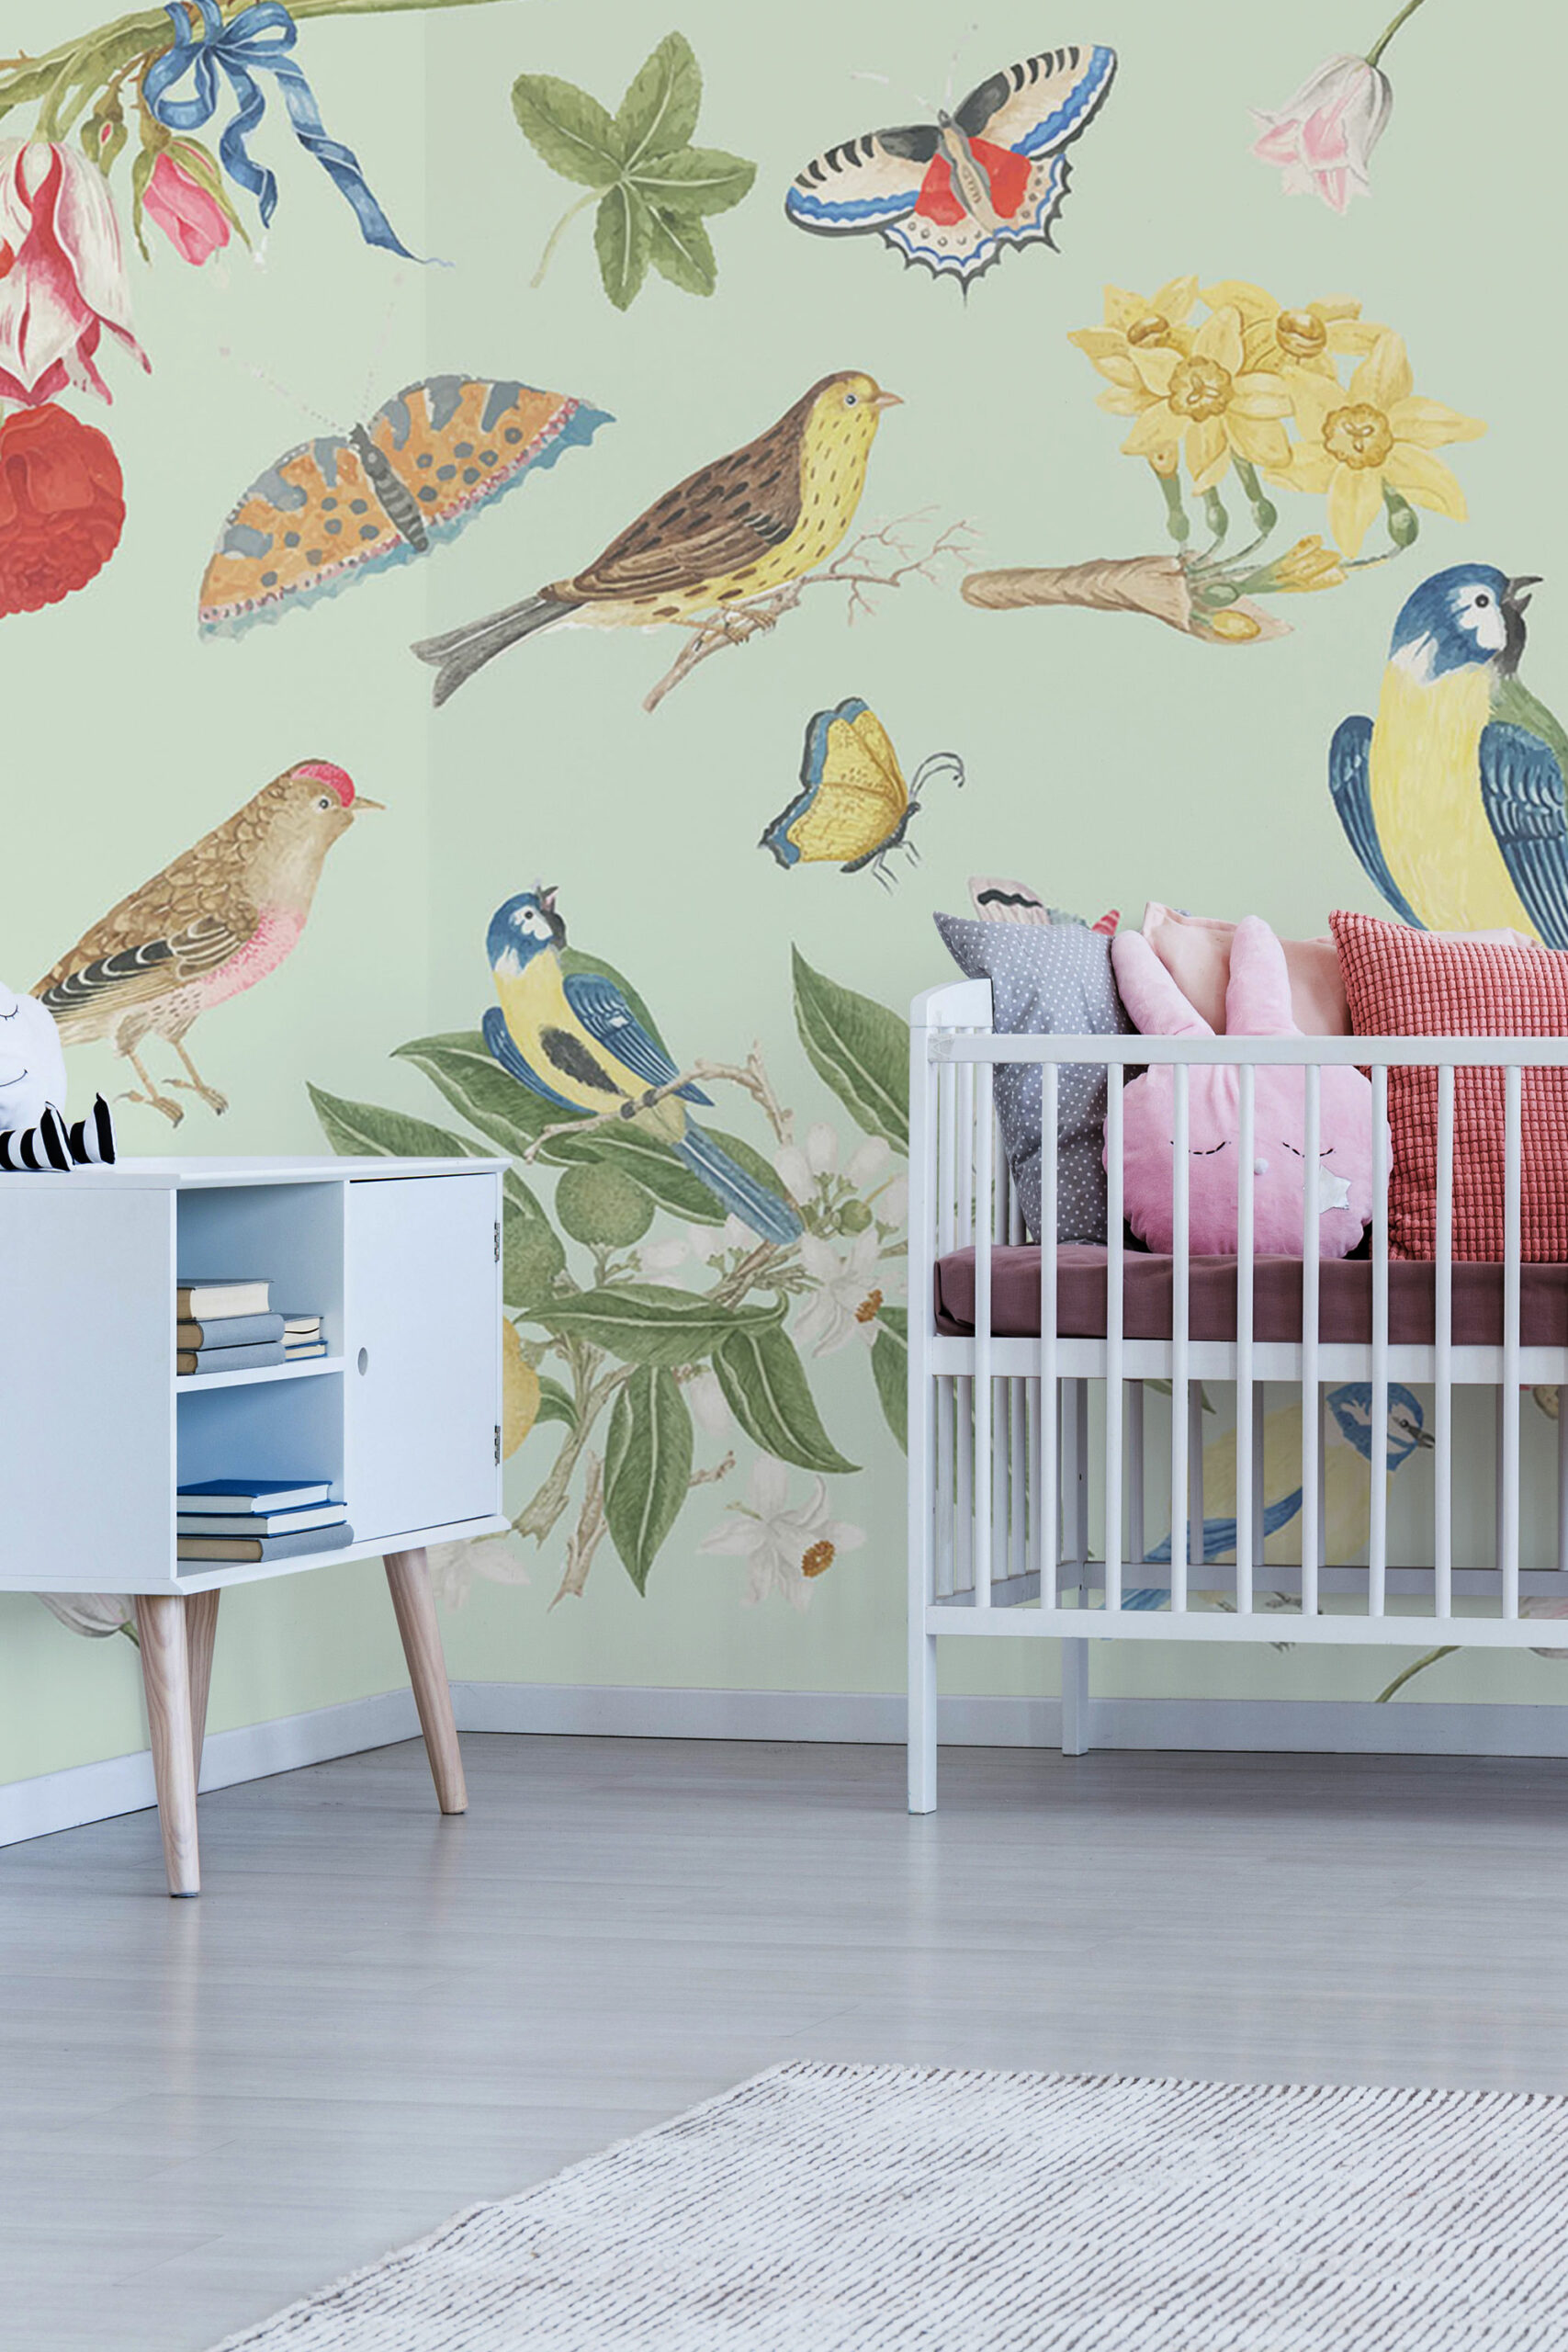 Verdant Vintage Birdsong Wall Mural, murals for walls by Fancy Walls